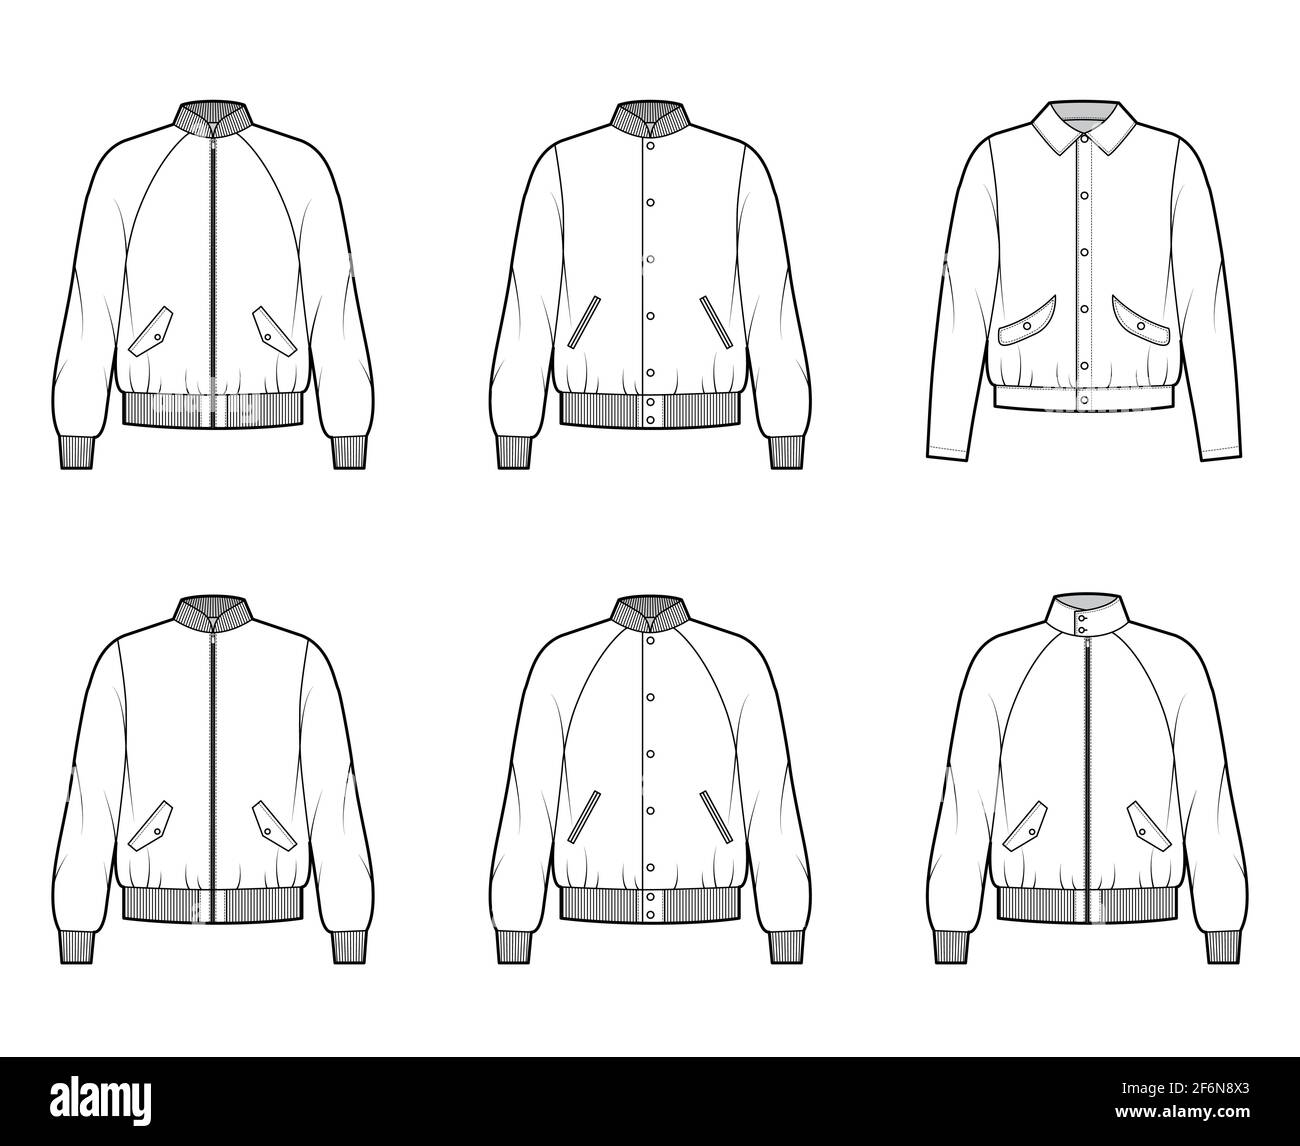 Set of Bomber jackets technical fashion illustration with Rib baseball collar, cuffs, oversized, long raglan sleeves, flap pockets. Flat coat template front, white color. Women, men, unisex top CAD Stock Vector